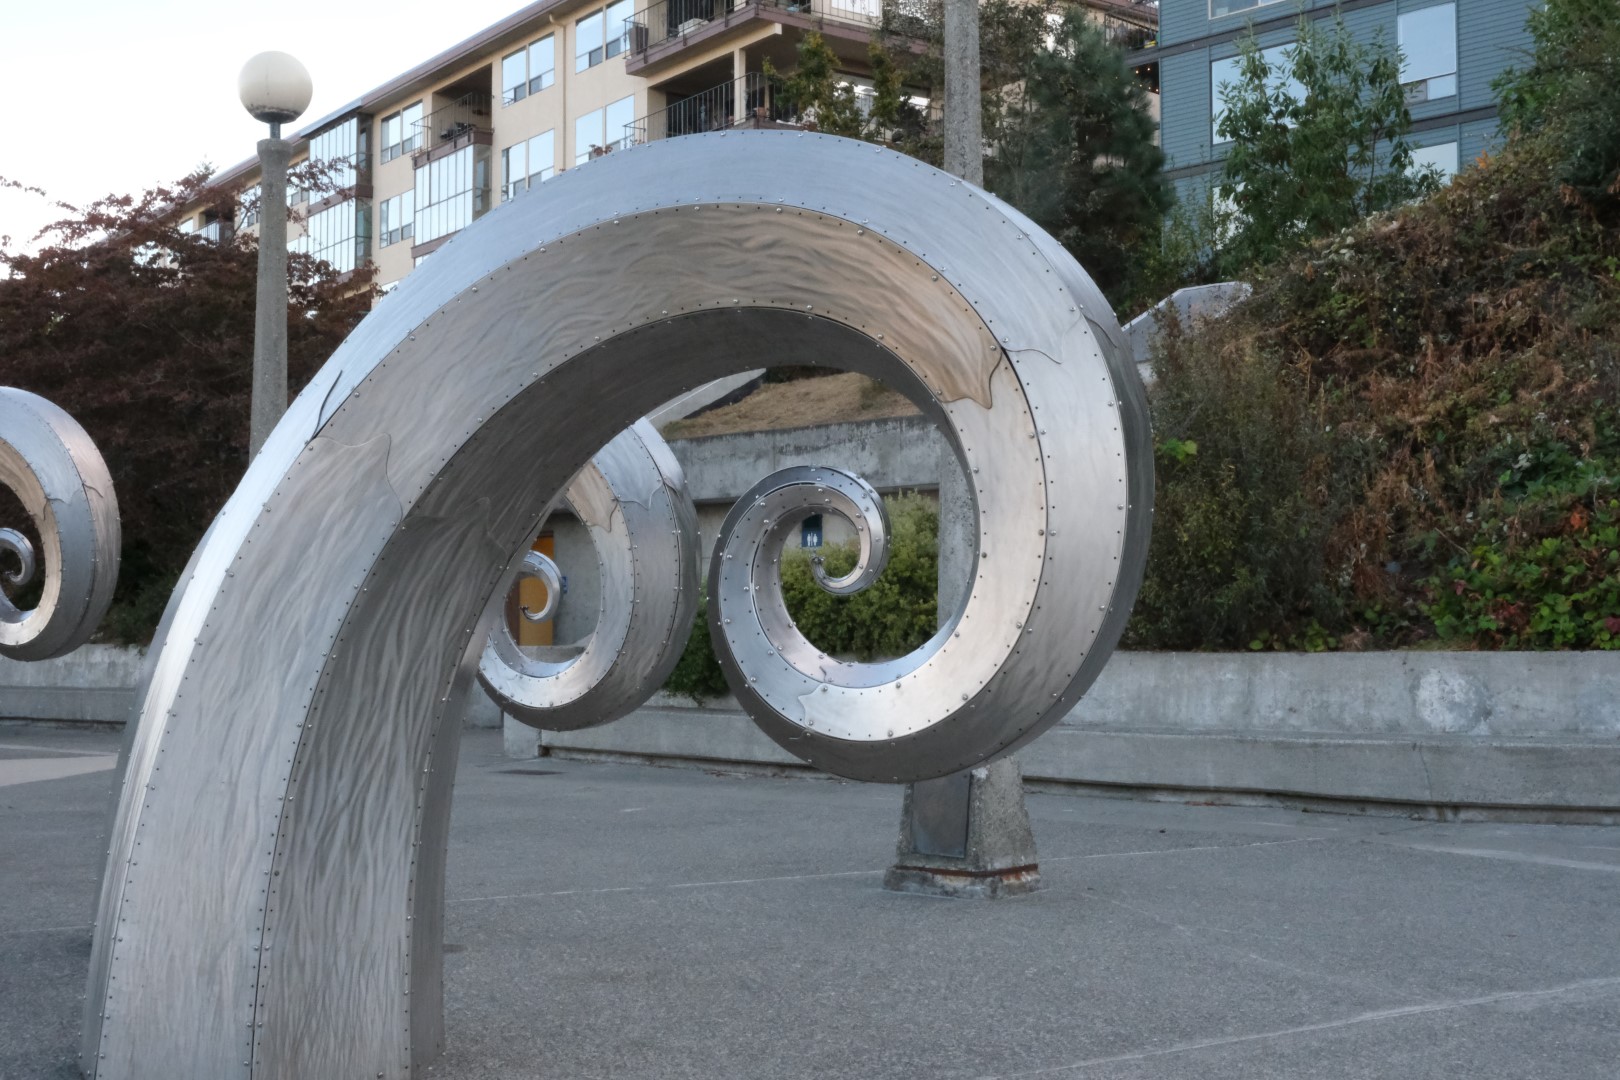 Photo unrelated to content of post. A metal sculpture rises up and curls into itself, with similar sculptures around it. Looking through the very center of the curve, an any-gender bathroom sign is visible.